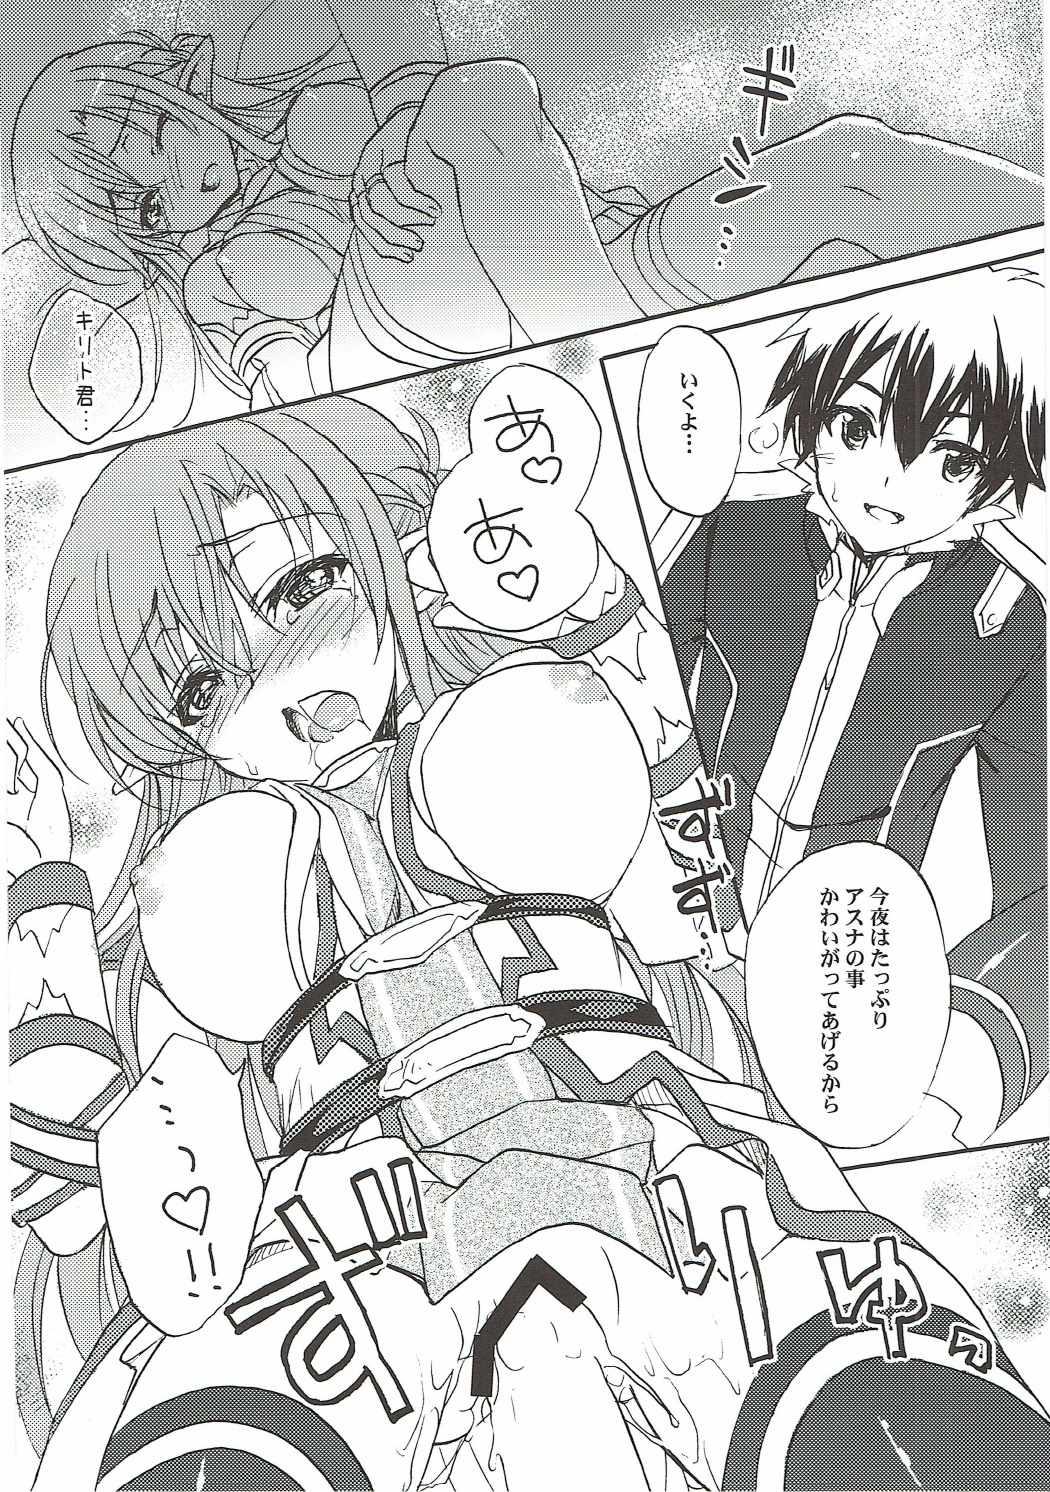 Thailand Home Sweet Home 2 - Sword art online Longhair - Page 11